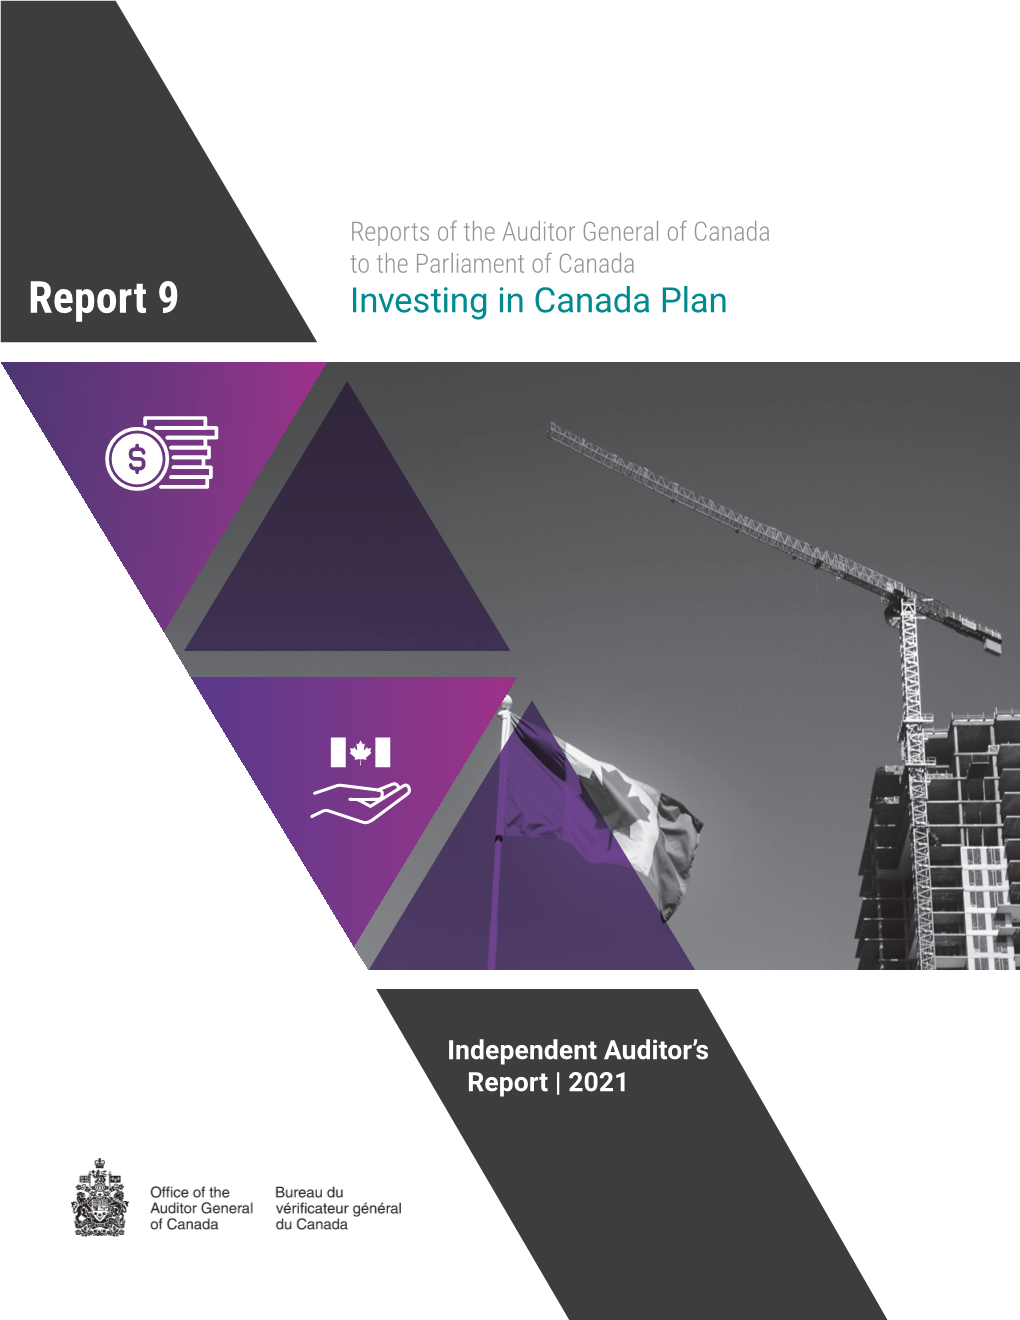 Report 9—Investing in Canada Plan